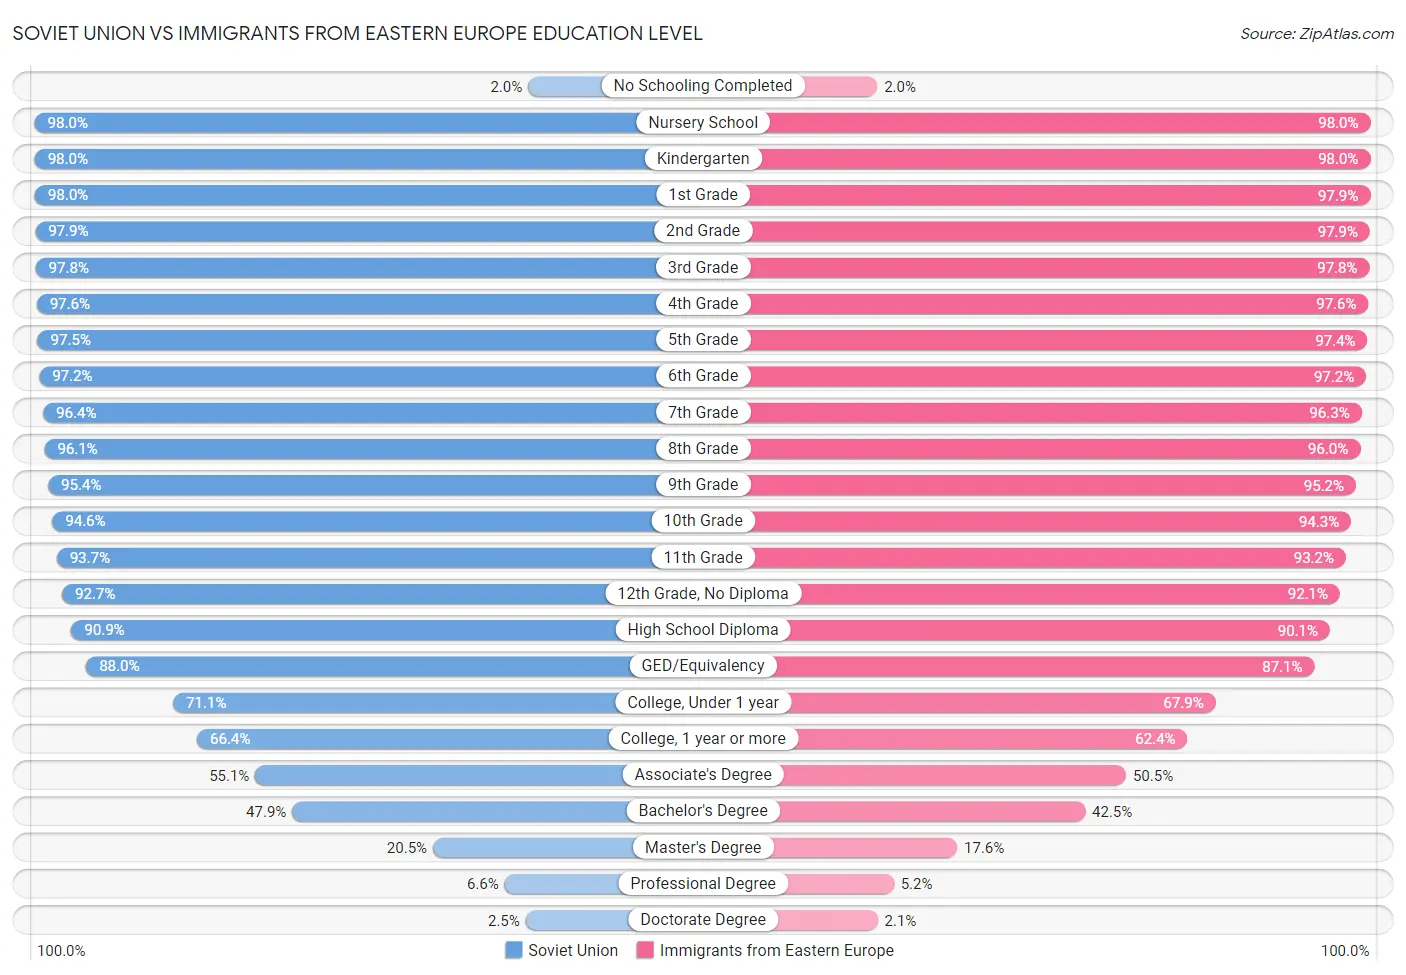 Soviet Union vs Immigrants from Eastern Europe Education Level